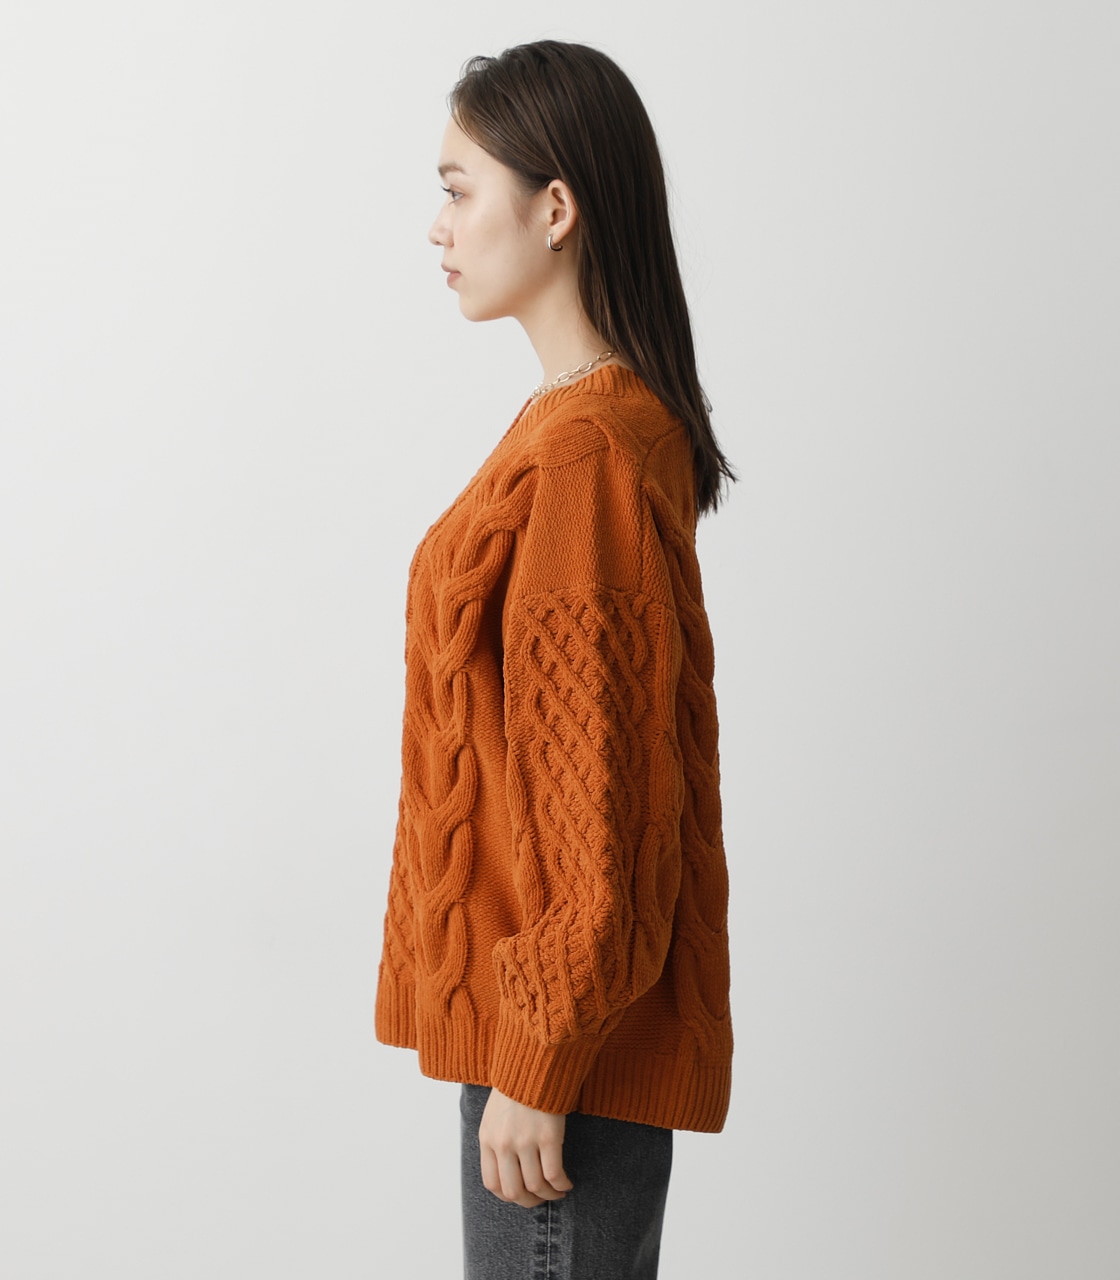 CHENILLE CABLE V/N KNIT TOPS/シェニールケーブルVネックニットトップス 詳細画像 D/ORG 6